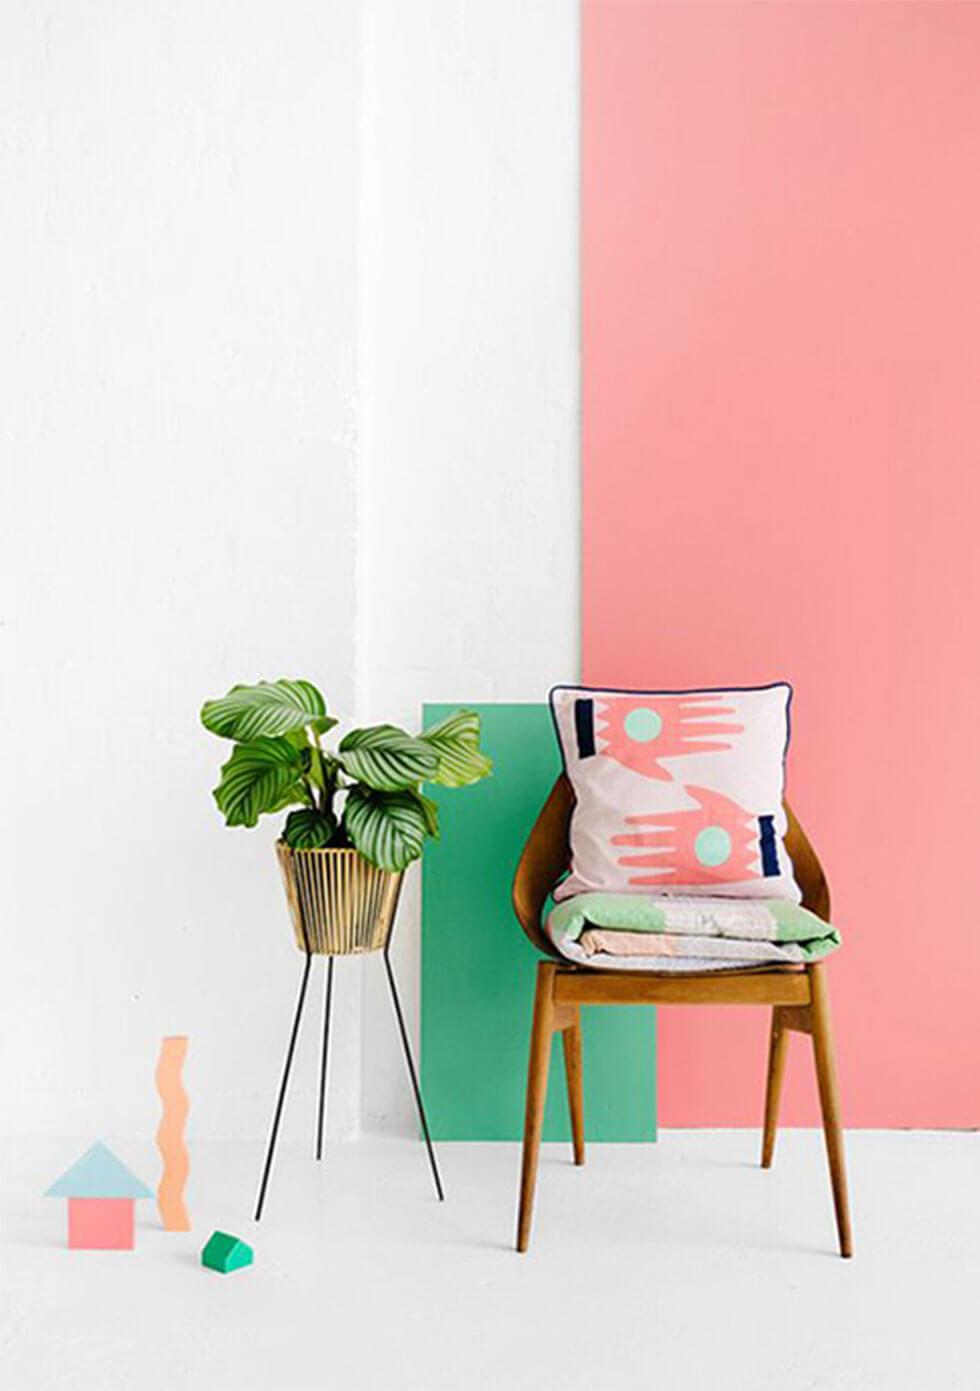 wooden chair against an energising neo-mint and coral pink wall.